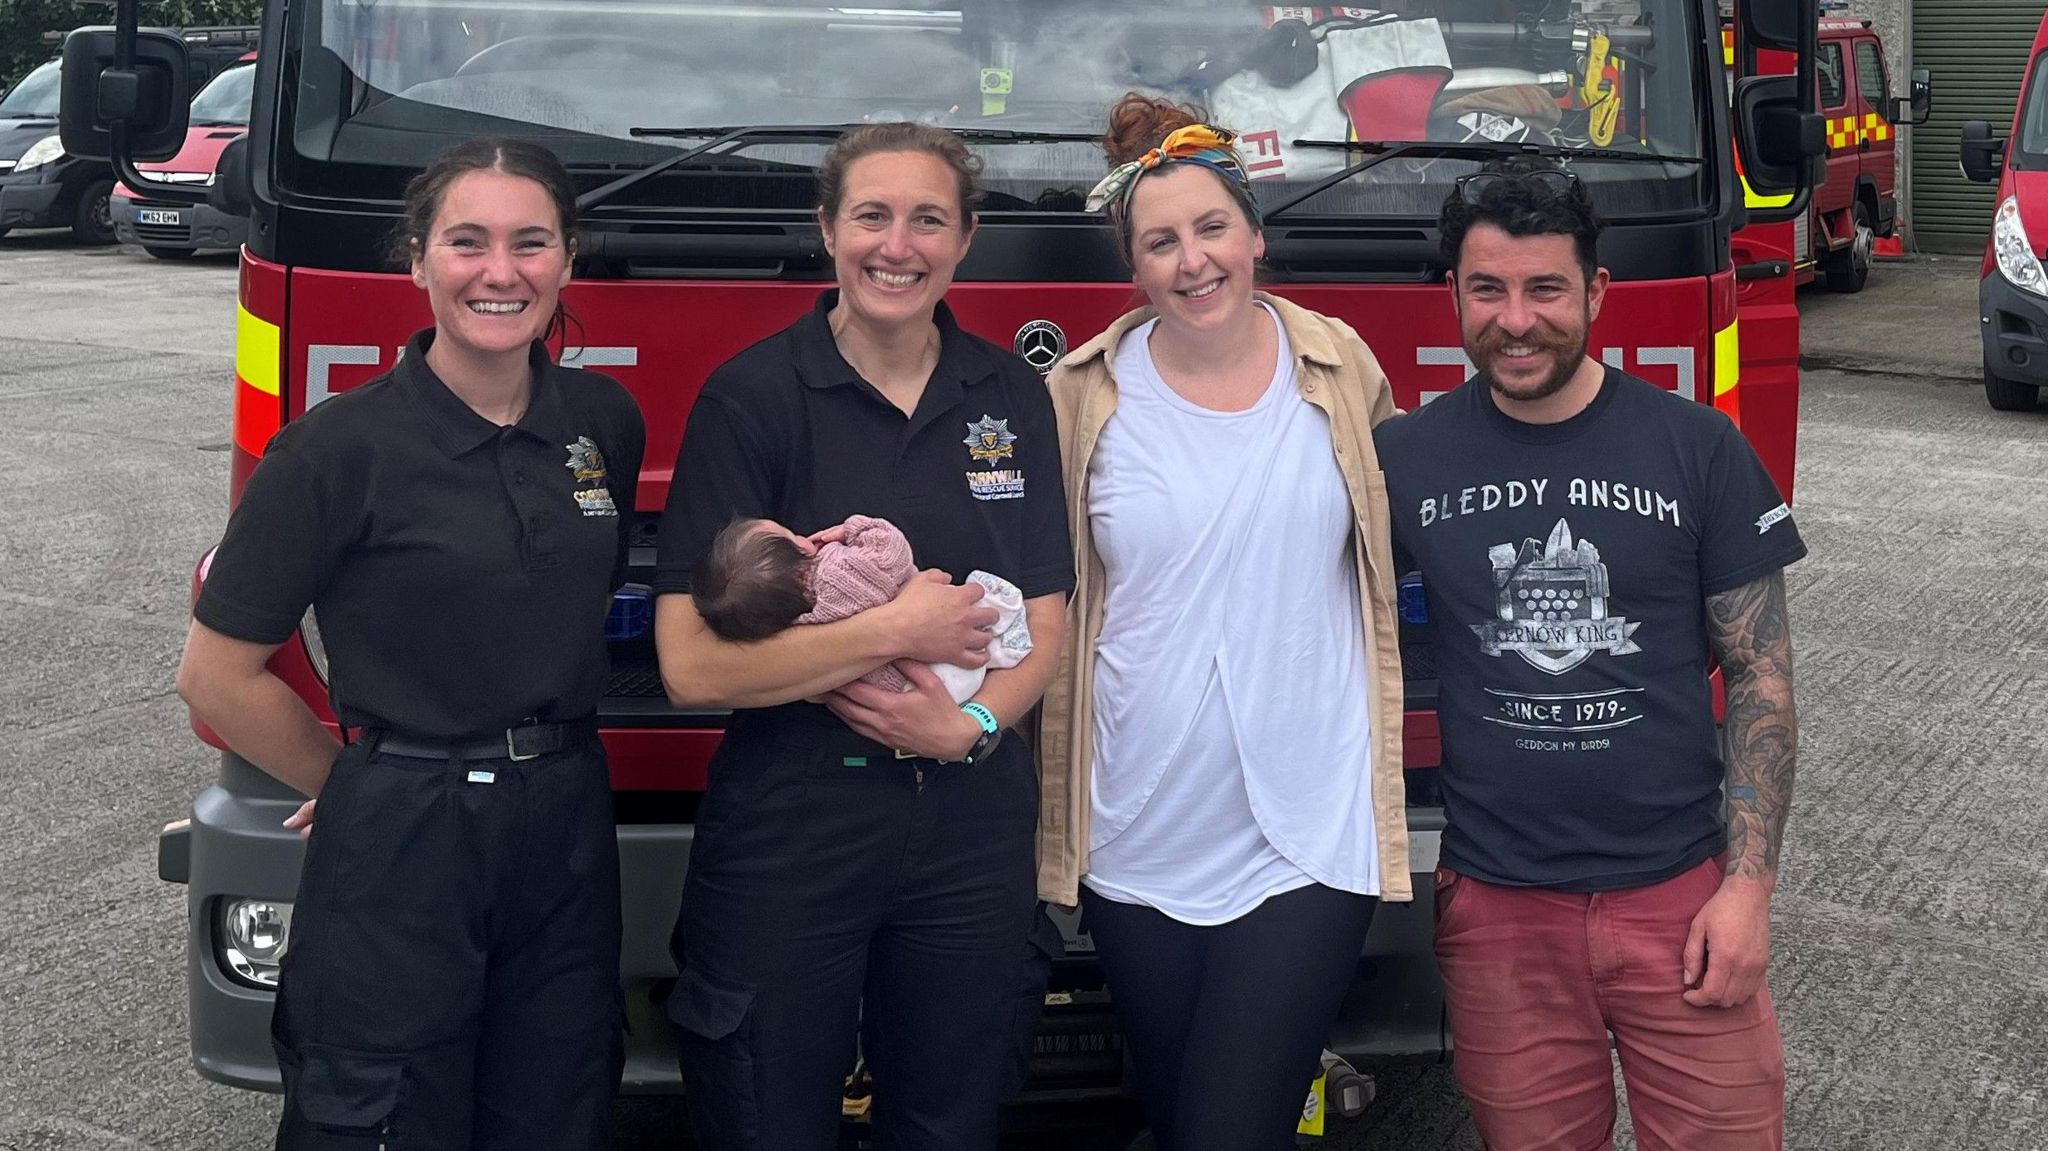 Two women firefighters stand in front of a fire engine, with one holding baby Olive, standing next to Olive's parents. All are smiling 